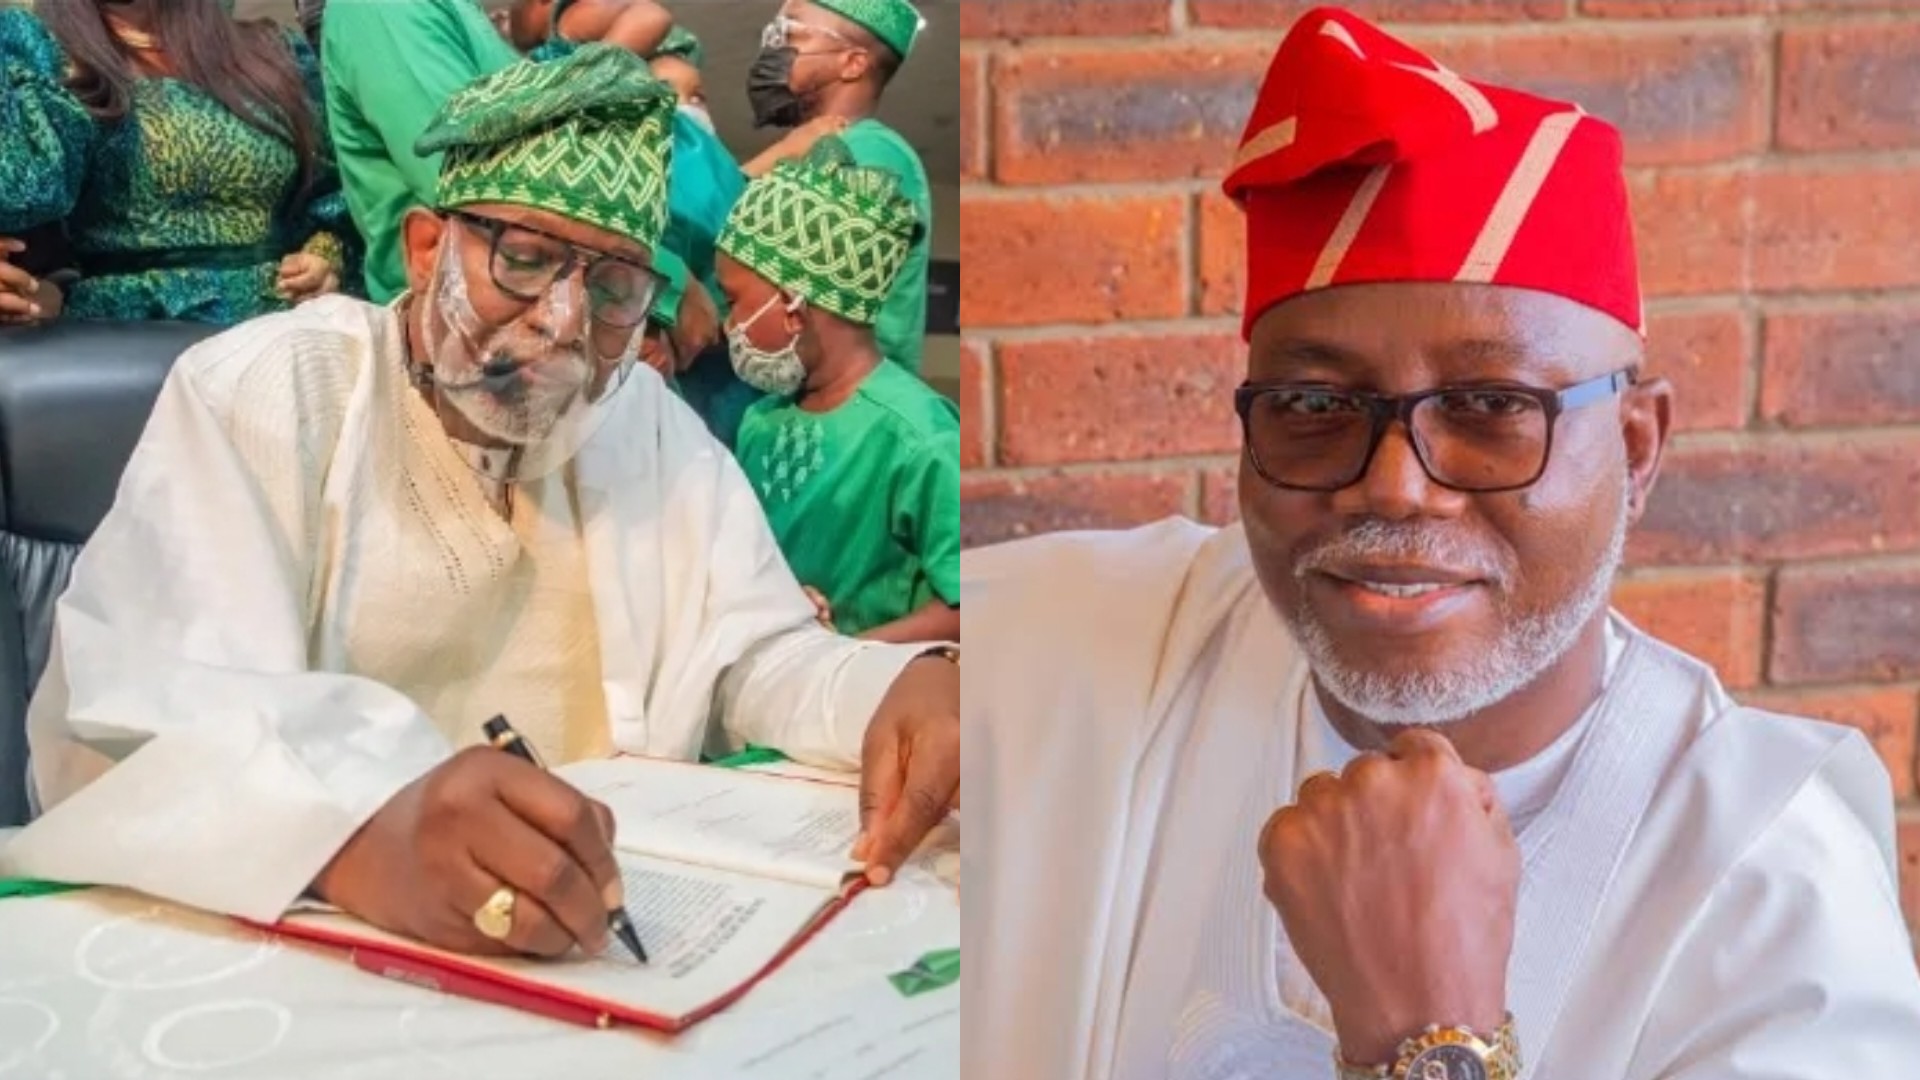 Breaking: Ondo Gov. Akeredolu takes another medical leave, transfers authority to Deputy